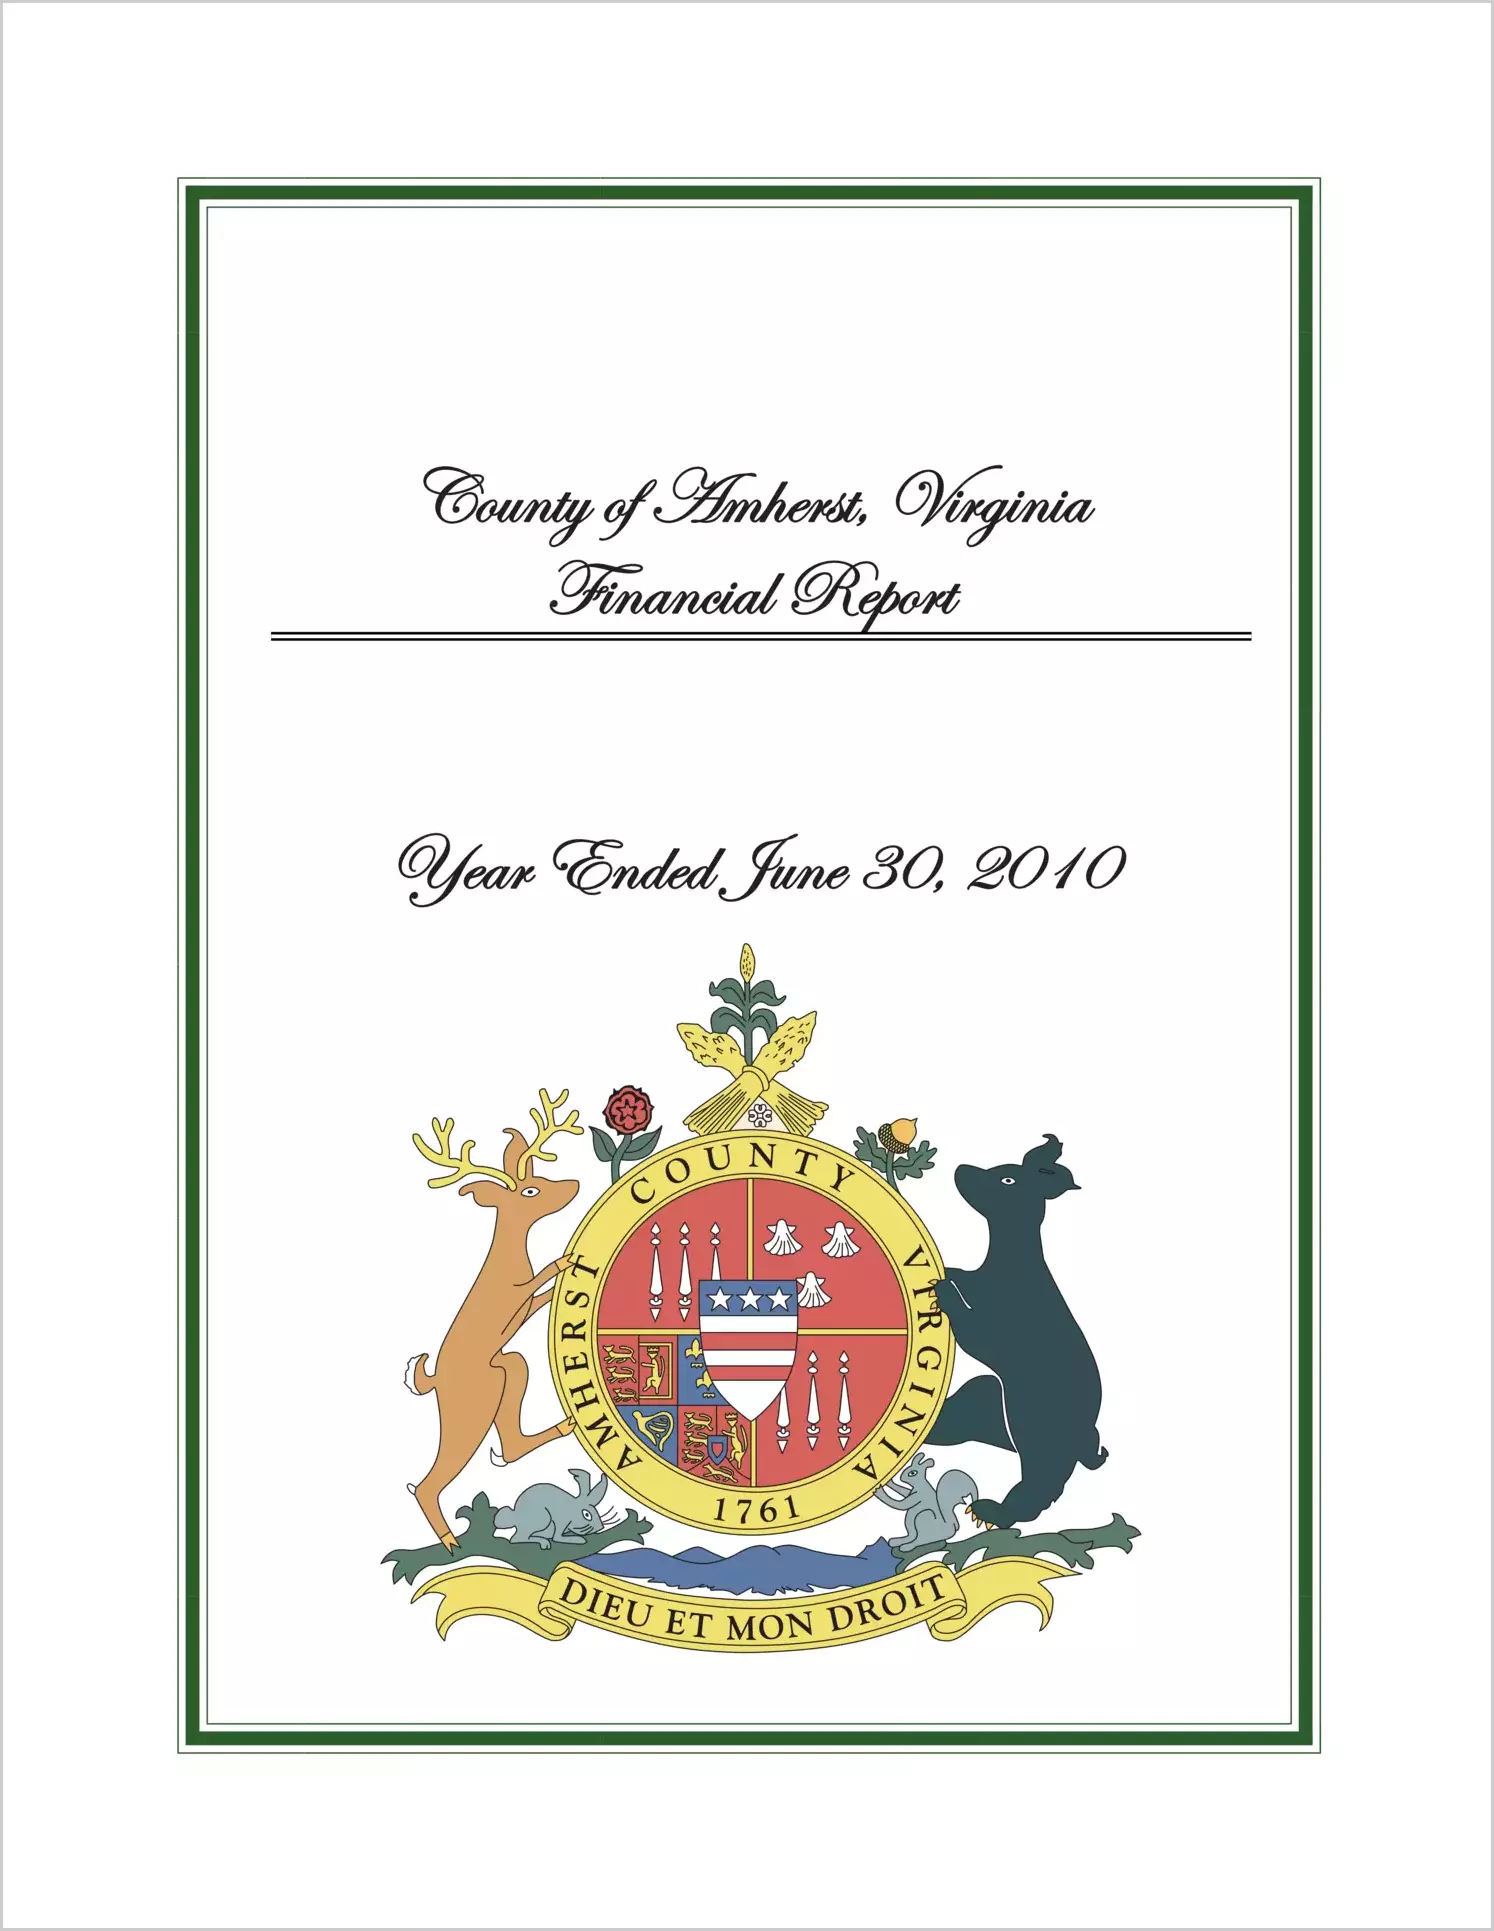 2010 Annual Financial Report for County of Amherst